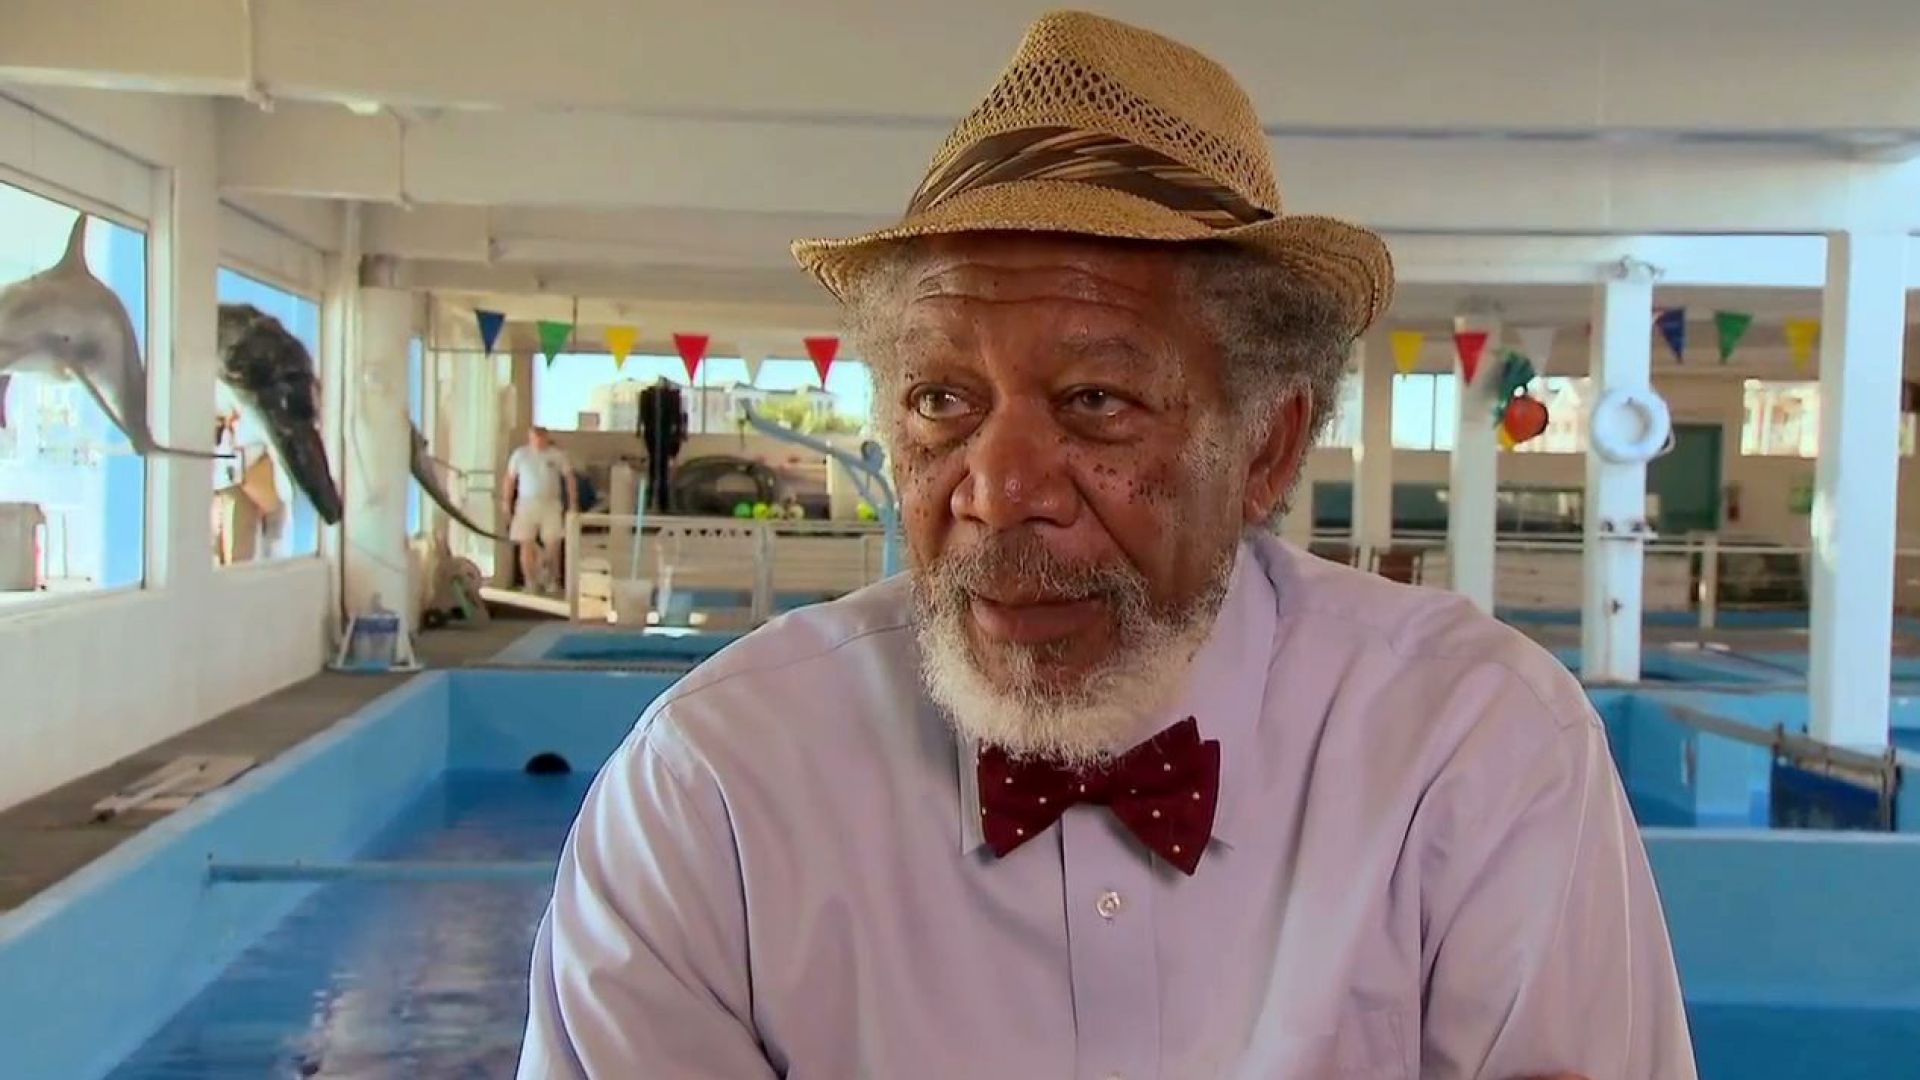 Morgan Freeman talks about his character Dr. McCarthy in Dolphin Tale